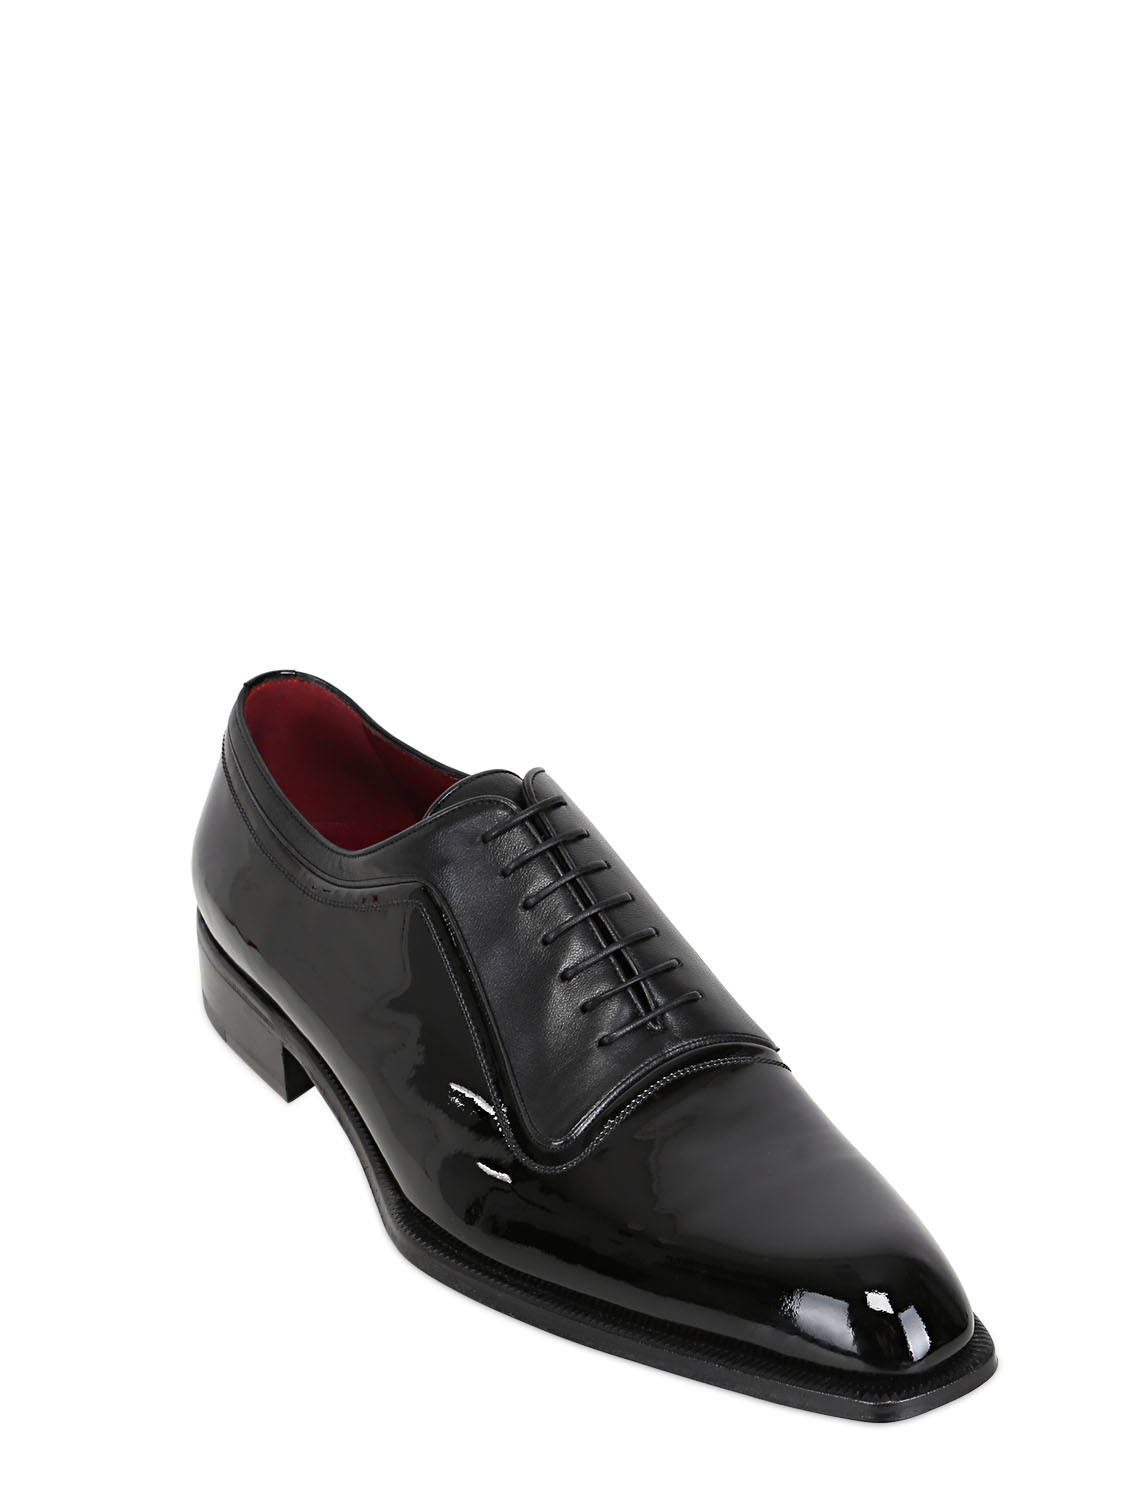 Lyst - A.Testoni Patent Nappa Leather Oxford Shoes in Black for Men